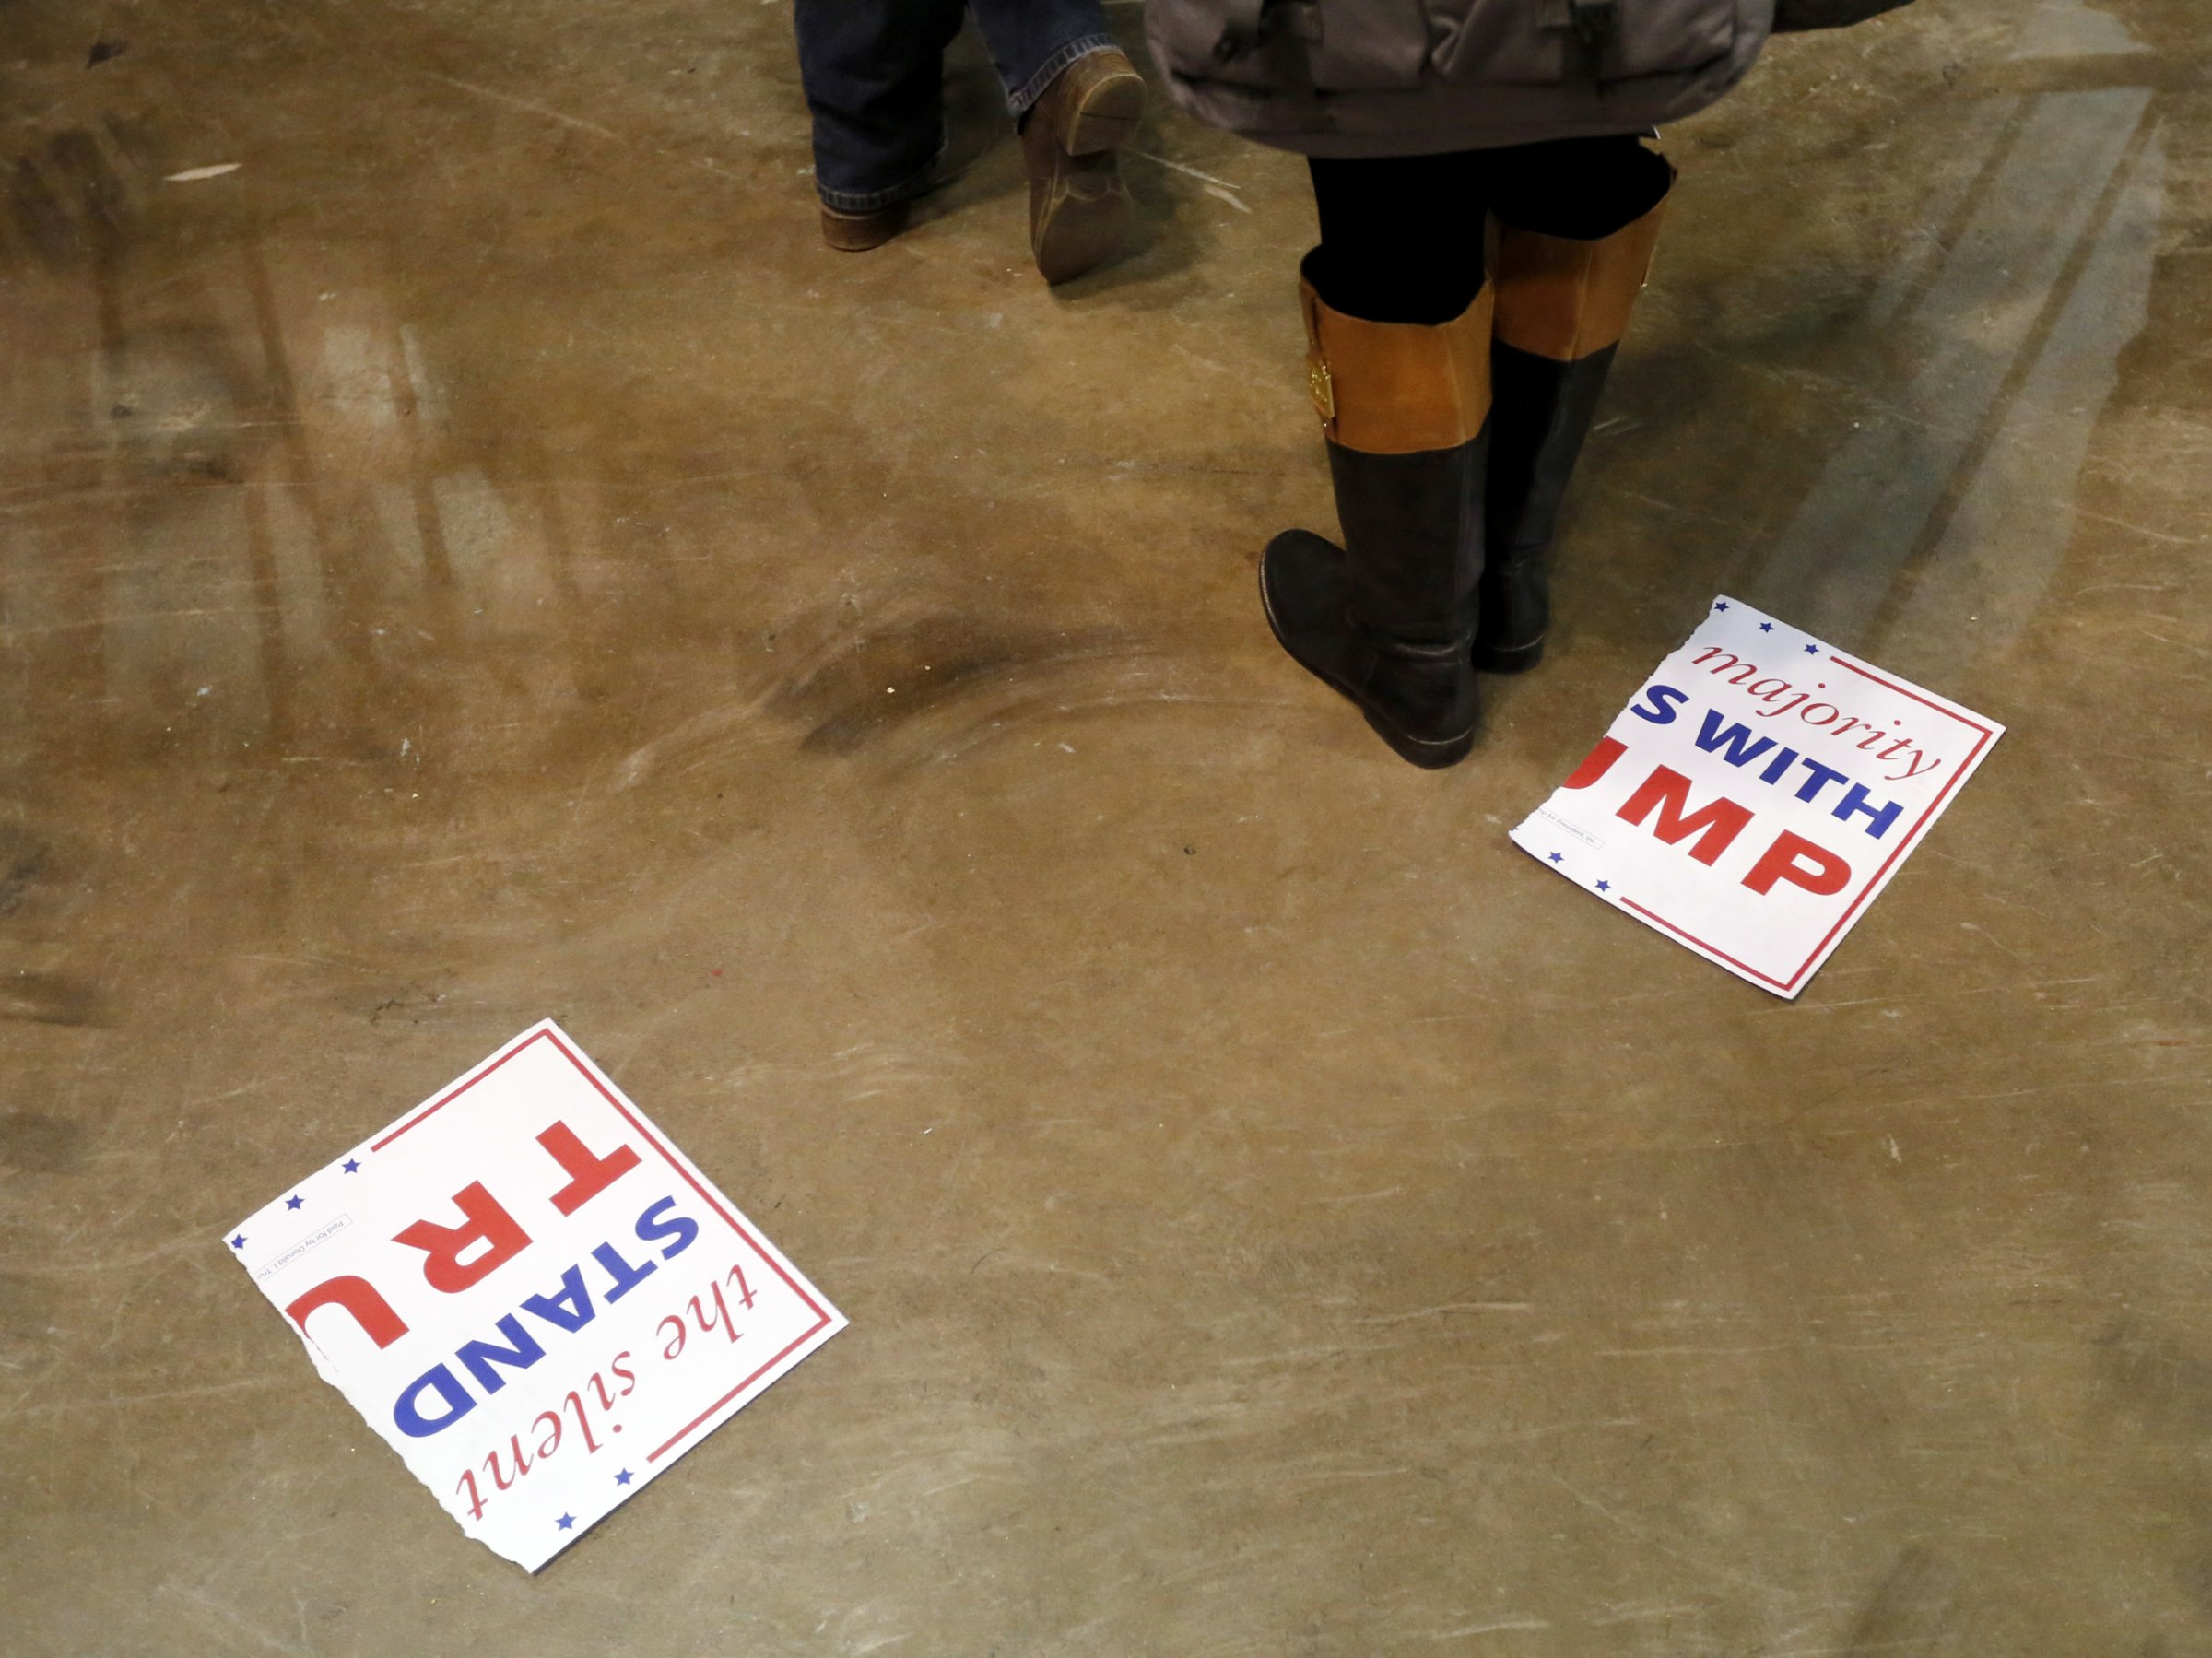 A torn campaign sign for Republican presidential candidate Donald Trump, lays on the floor after a rally for Trump was canceled due to security concerns, on the campus of the University of Illinois-Chicago, Friday, March 11, 2016, in Chicago. (AP Photo/Charles Rex Arbogast)